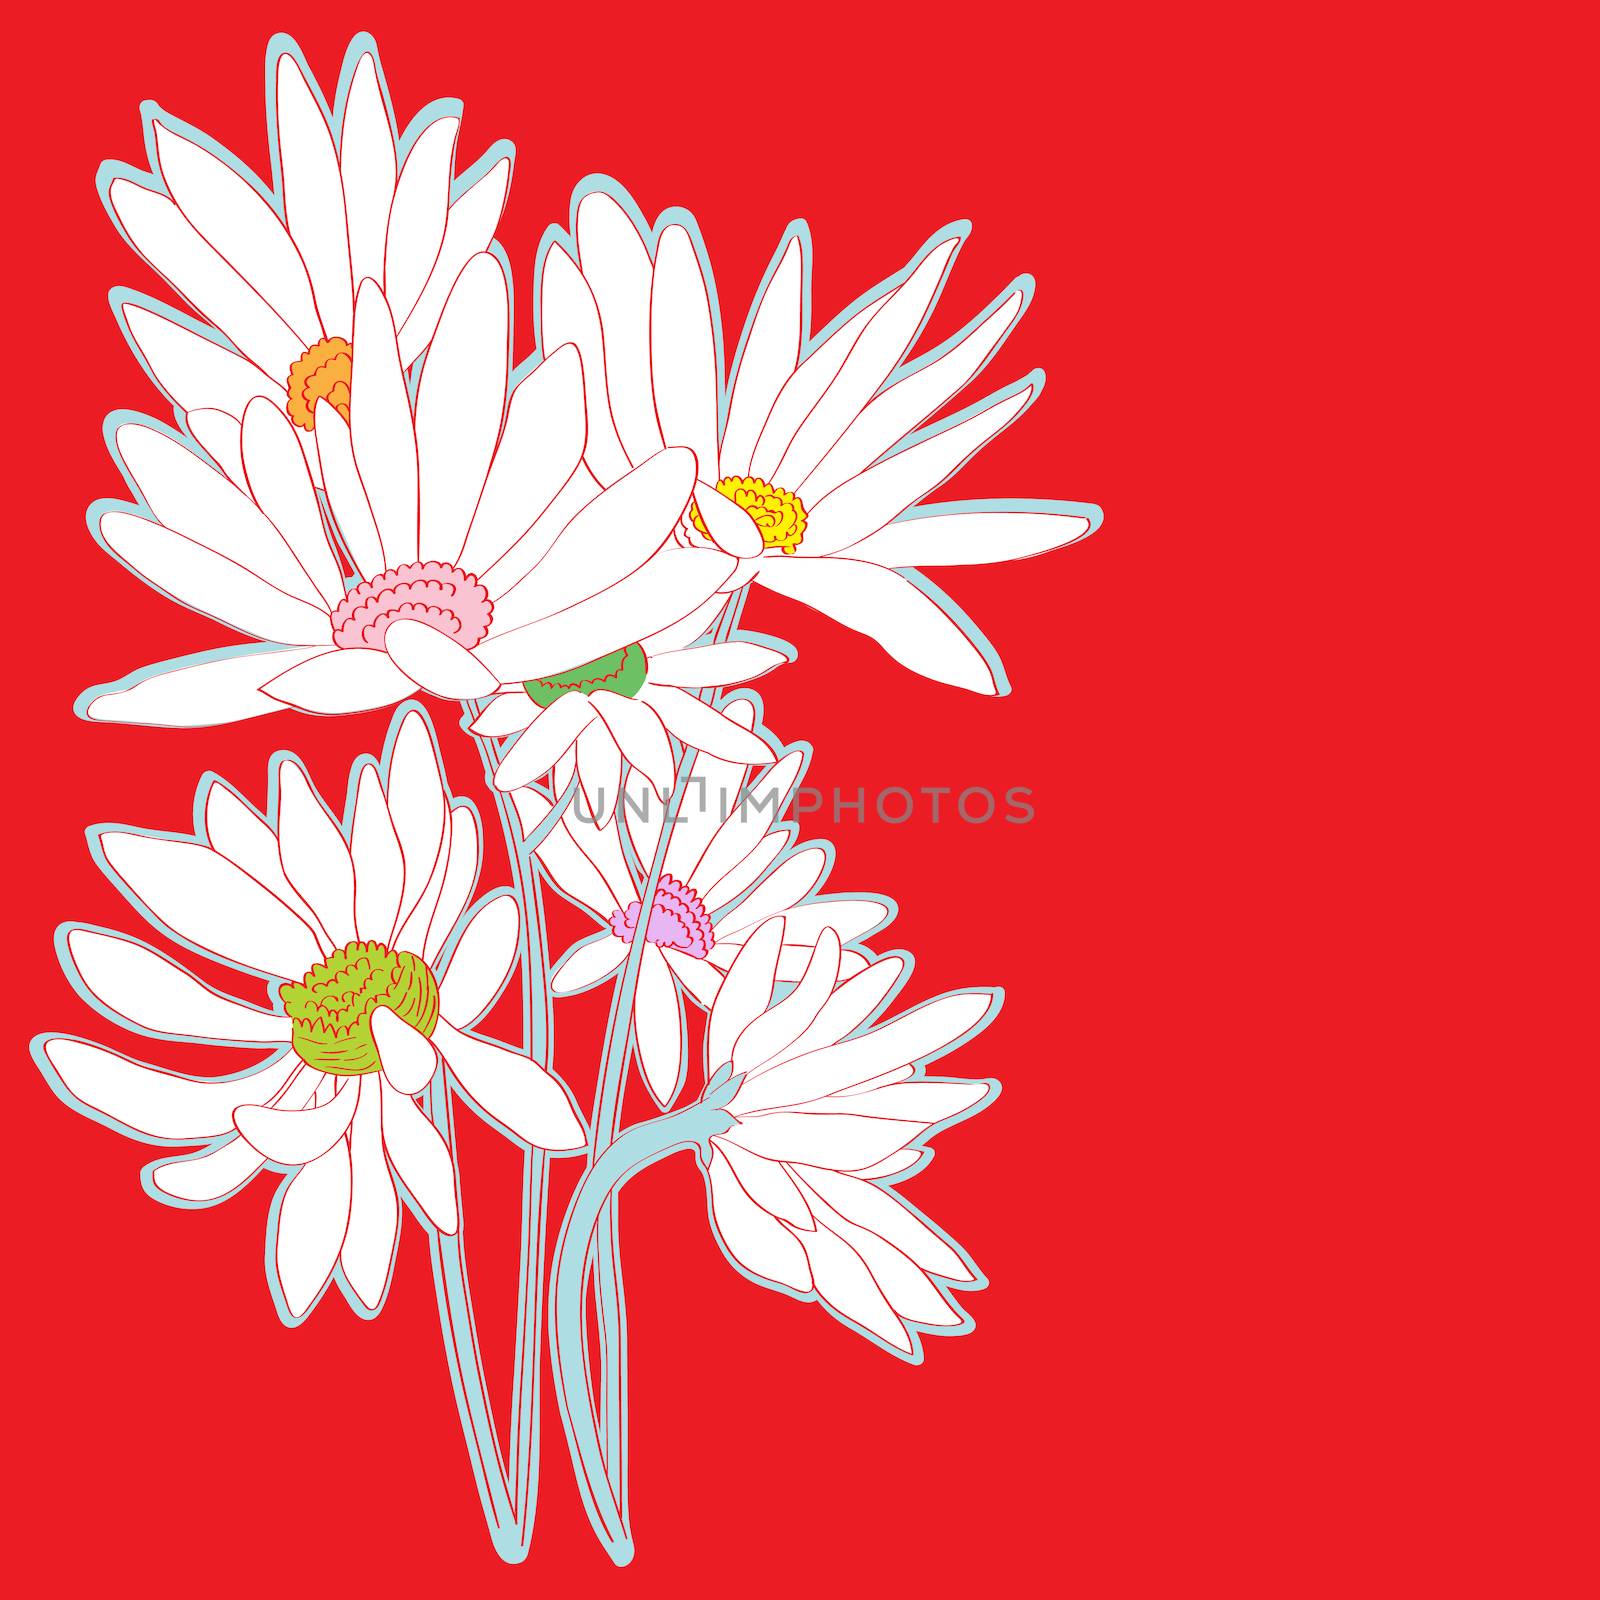 Hand drawn illustration of a greeting card with daisies, sticker over a red background